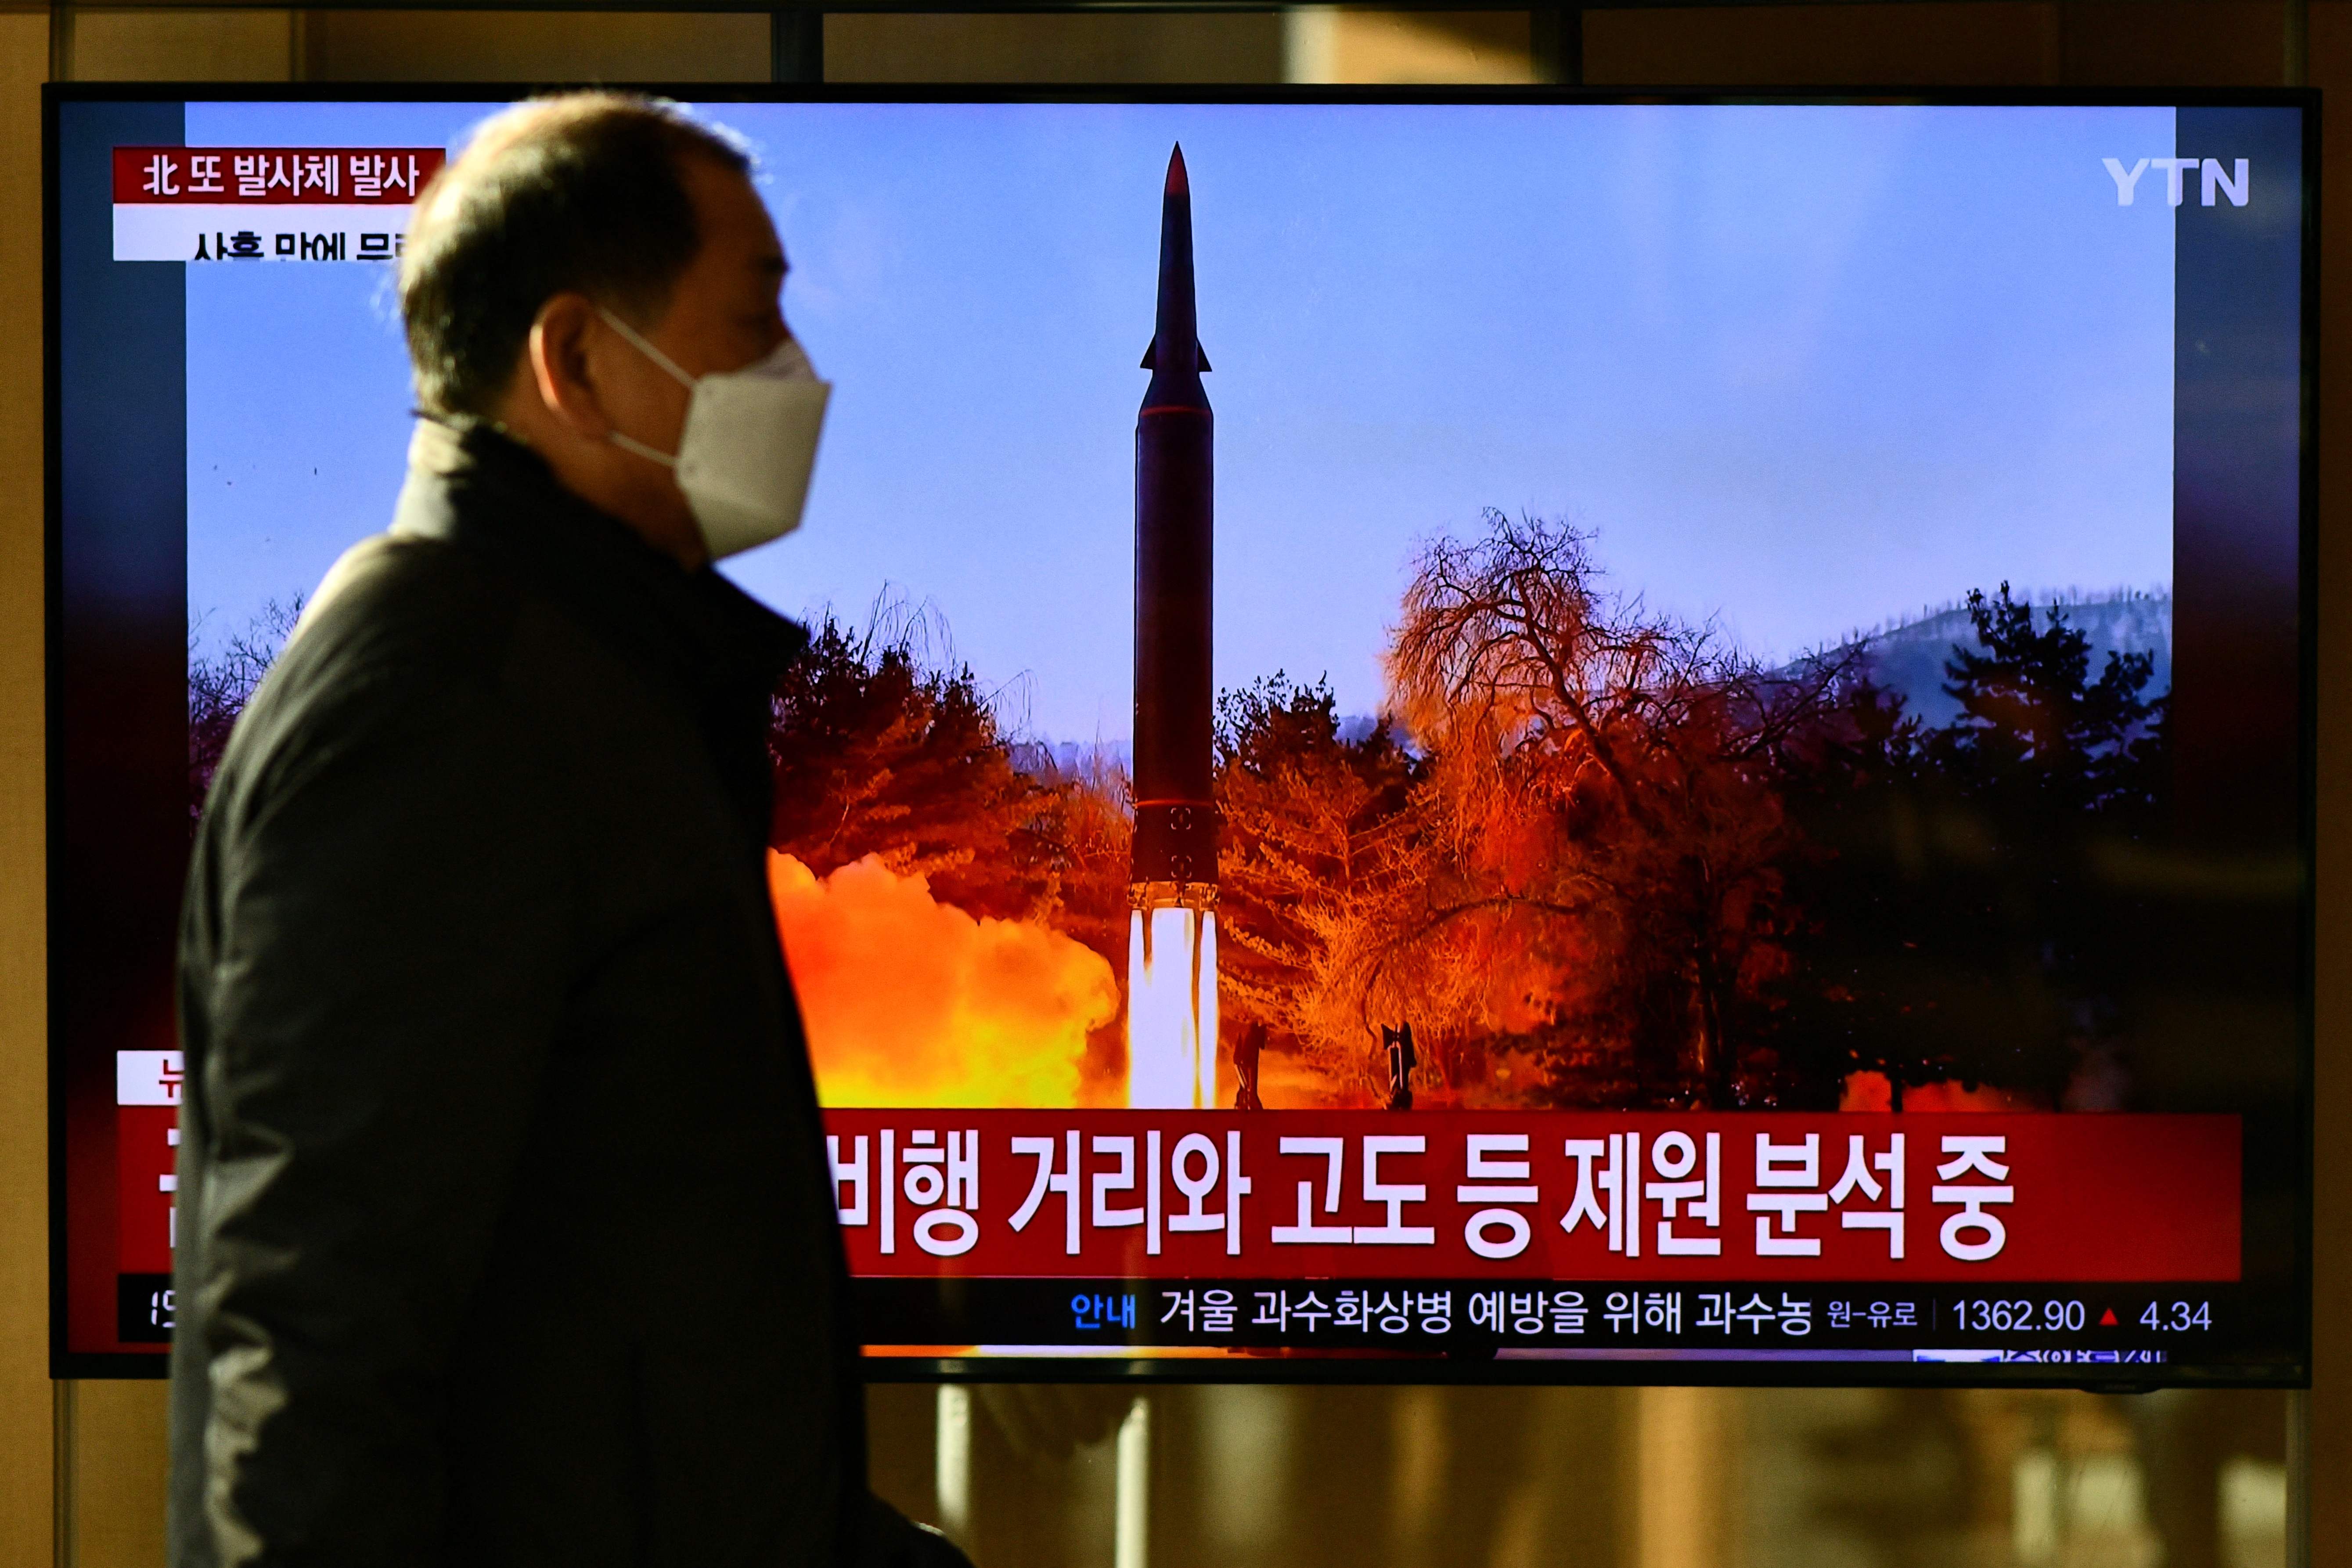 A man walks past a video screen in Seoul showing footage of a North Korean missile test